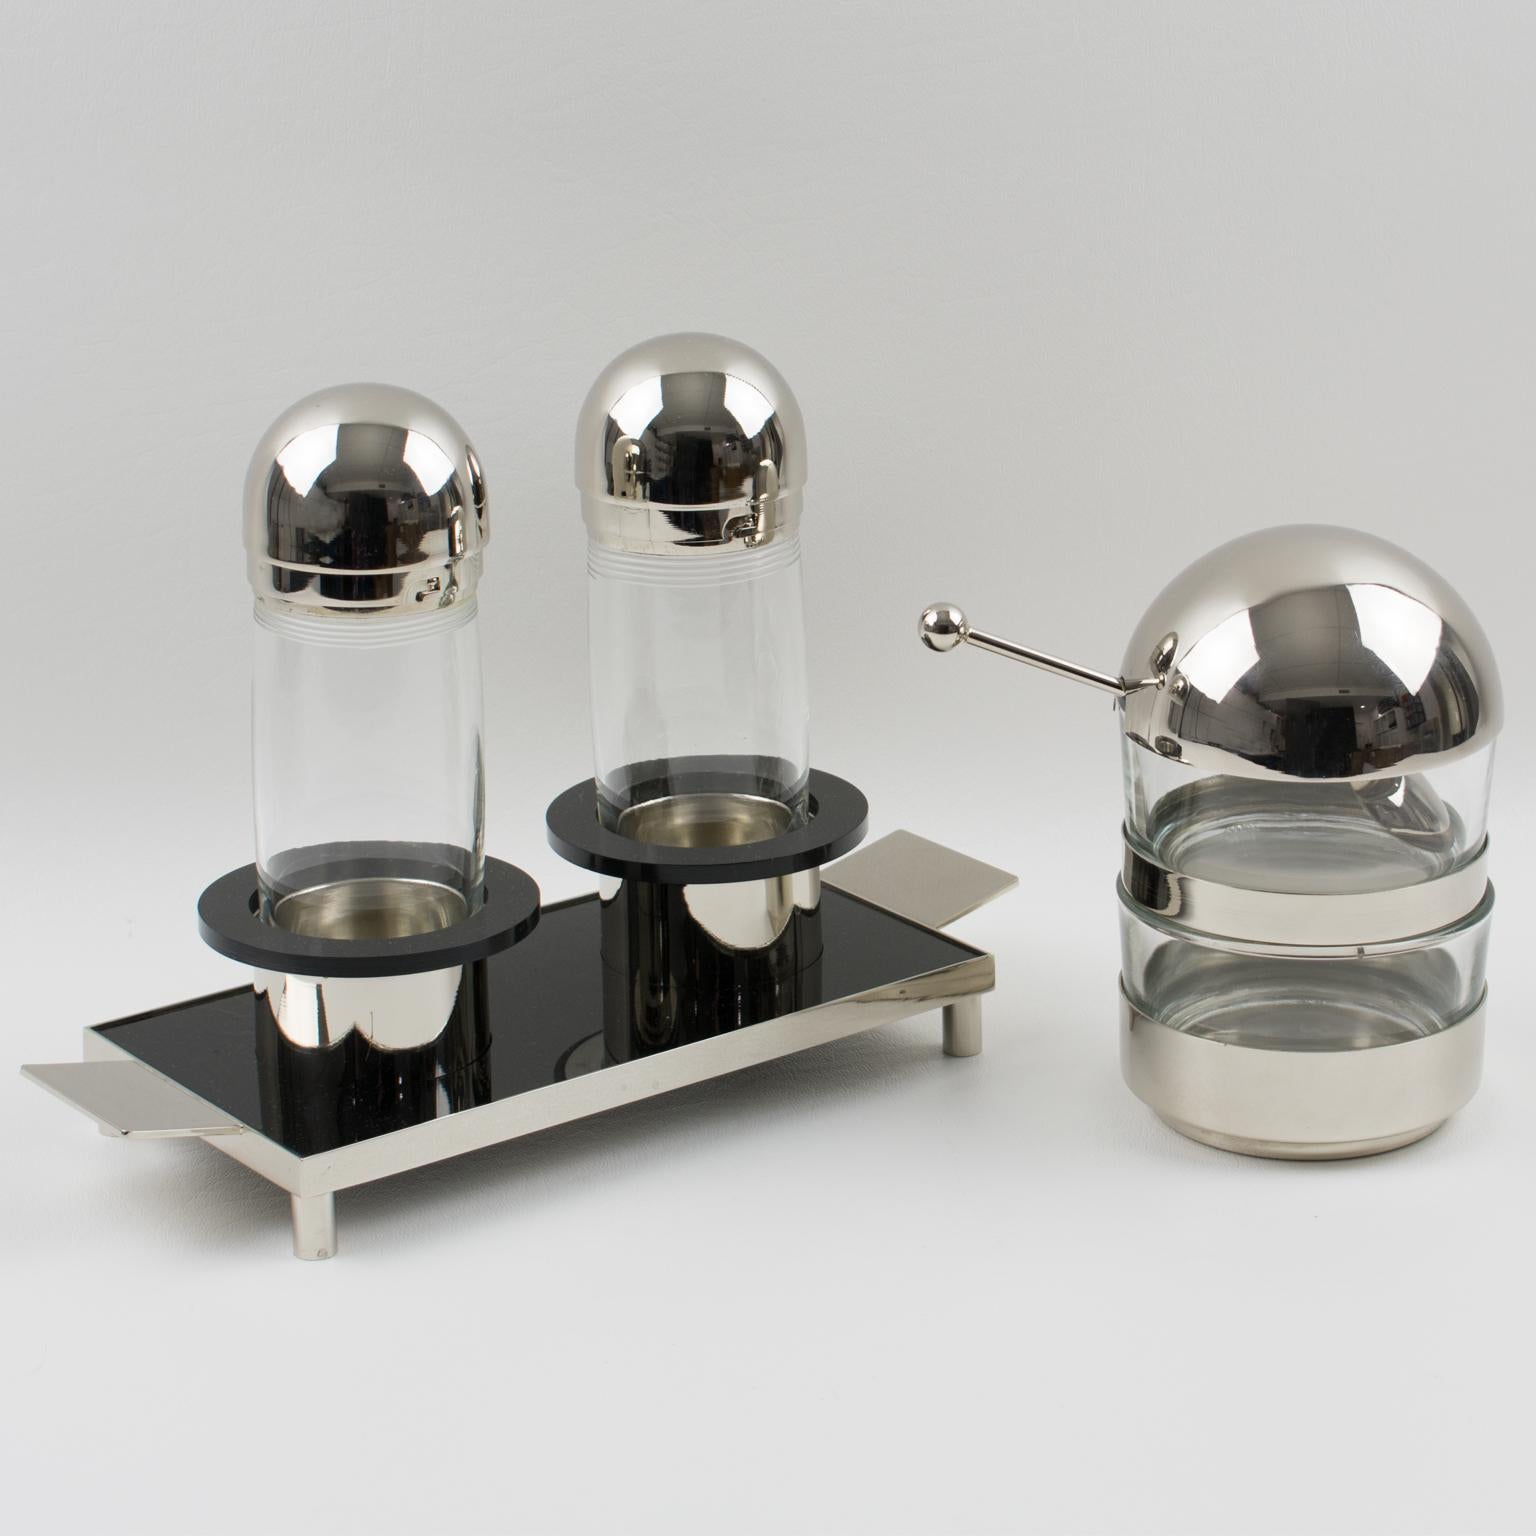 Stunning Italian modernist condiment service set. Modern form, modern design, modern material created by Punto Bacola for Montagnani, Florence, Italy, circa 1980 (Memphis period). The Set is built with oil and vinegar containers set on a serving